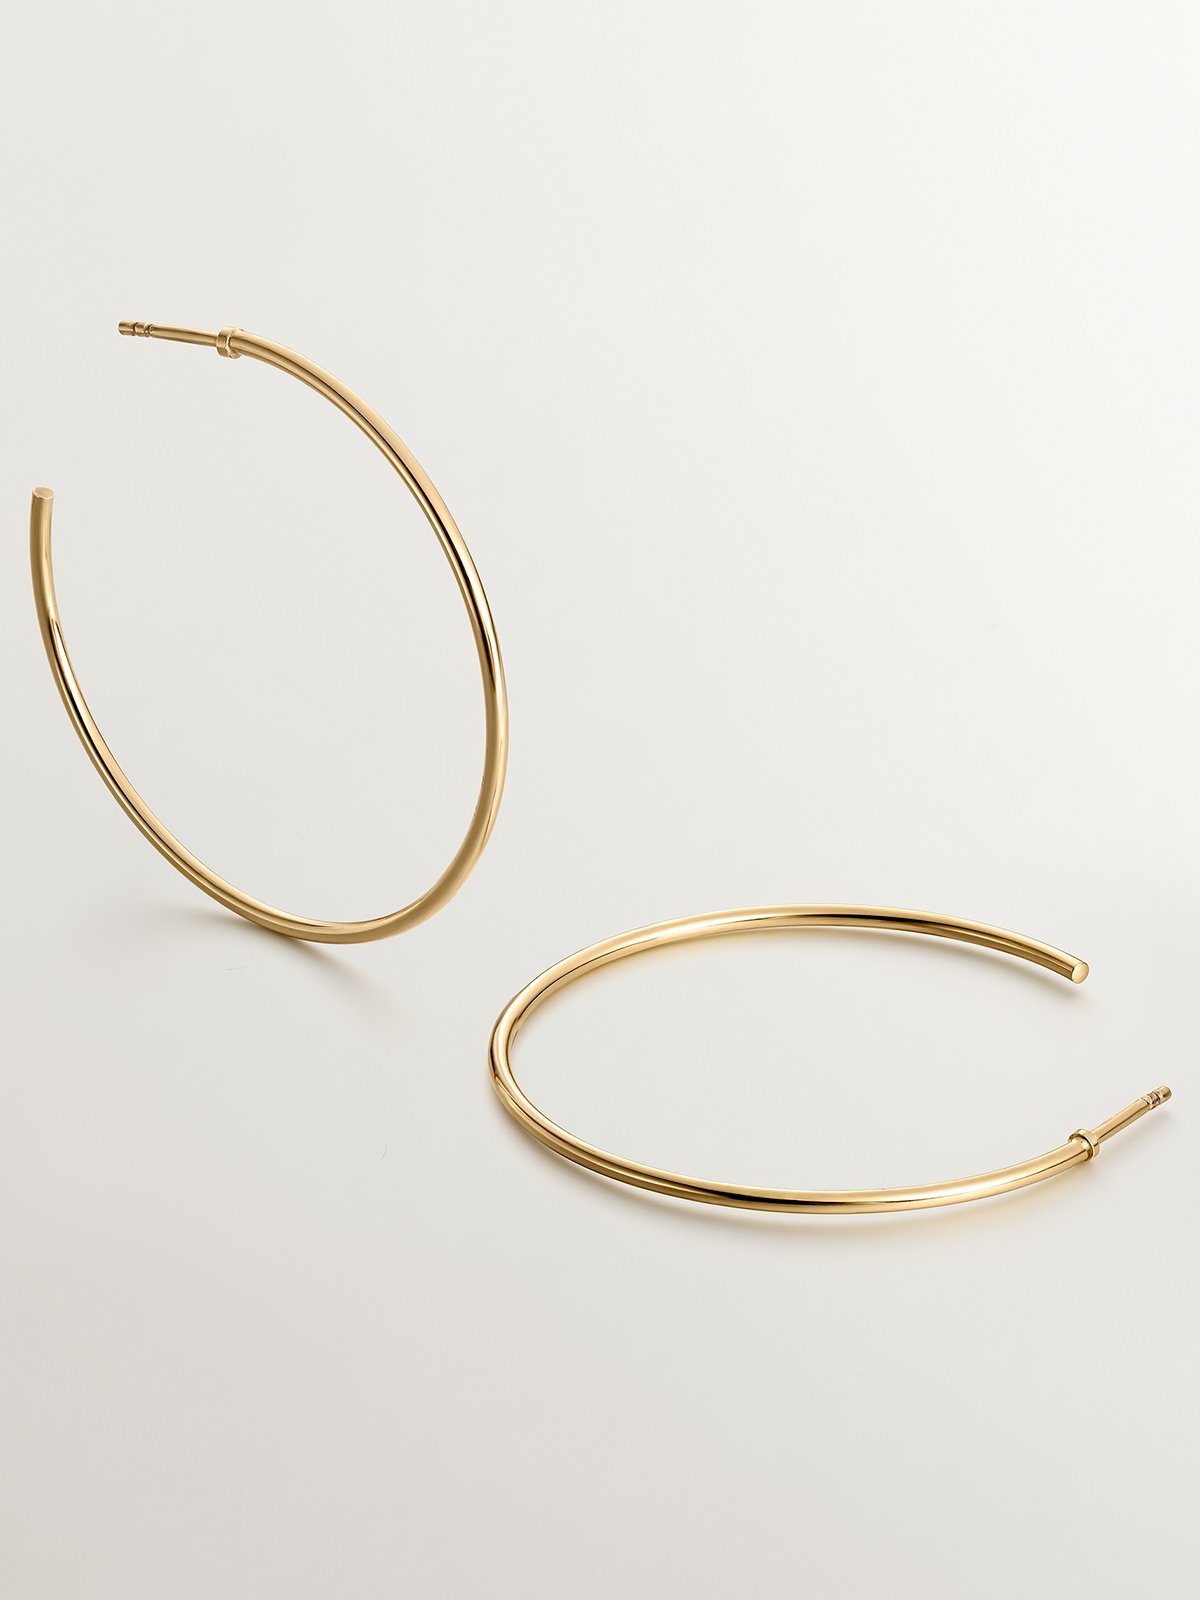 Large hoop earrings made of 925 silver coated in 18K yellow gold.